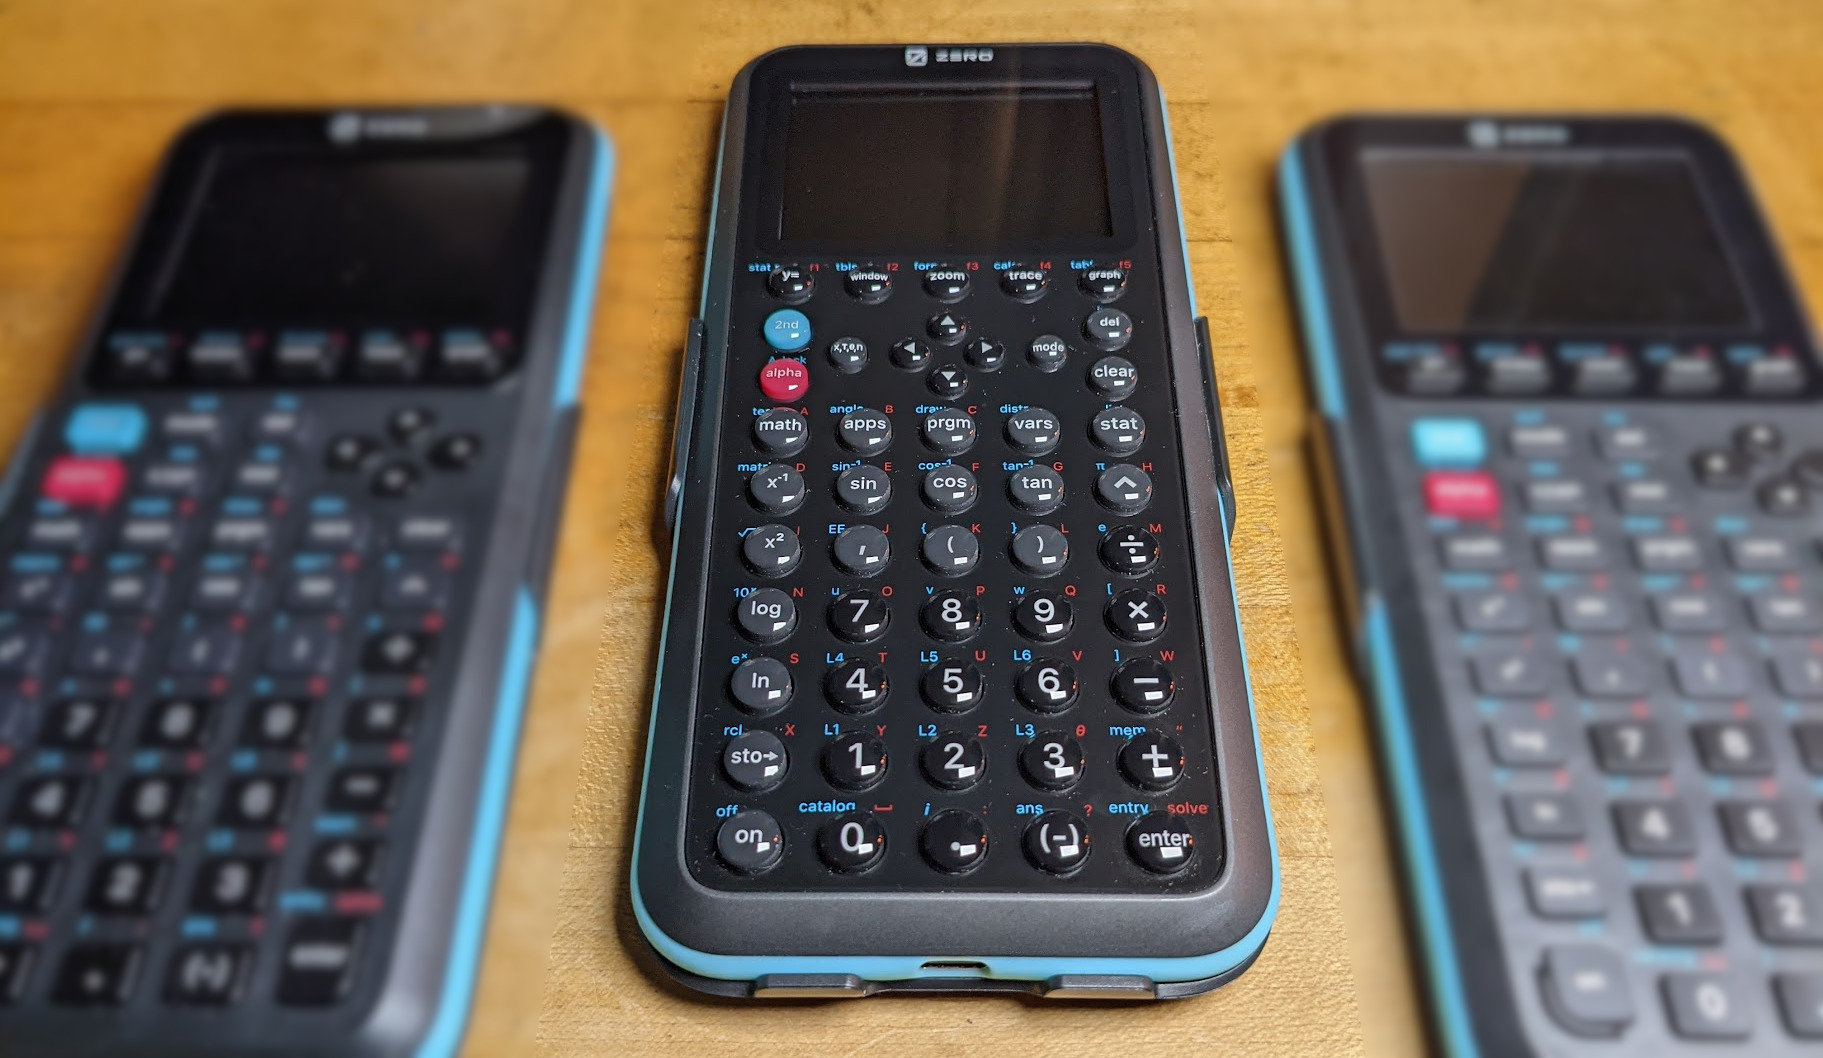 A photograph of three graphing calculators, the Zero Calculators ZGC3 in sharp focus at center, flanked by blurred ZGC1 and ZGC2 prototypes at left and right, respectively.